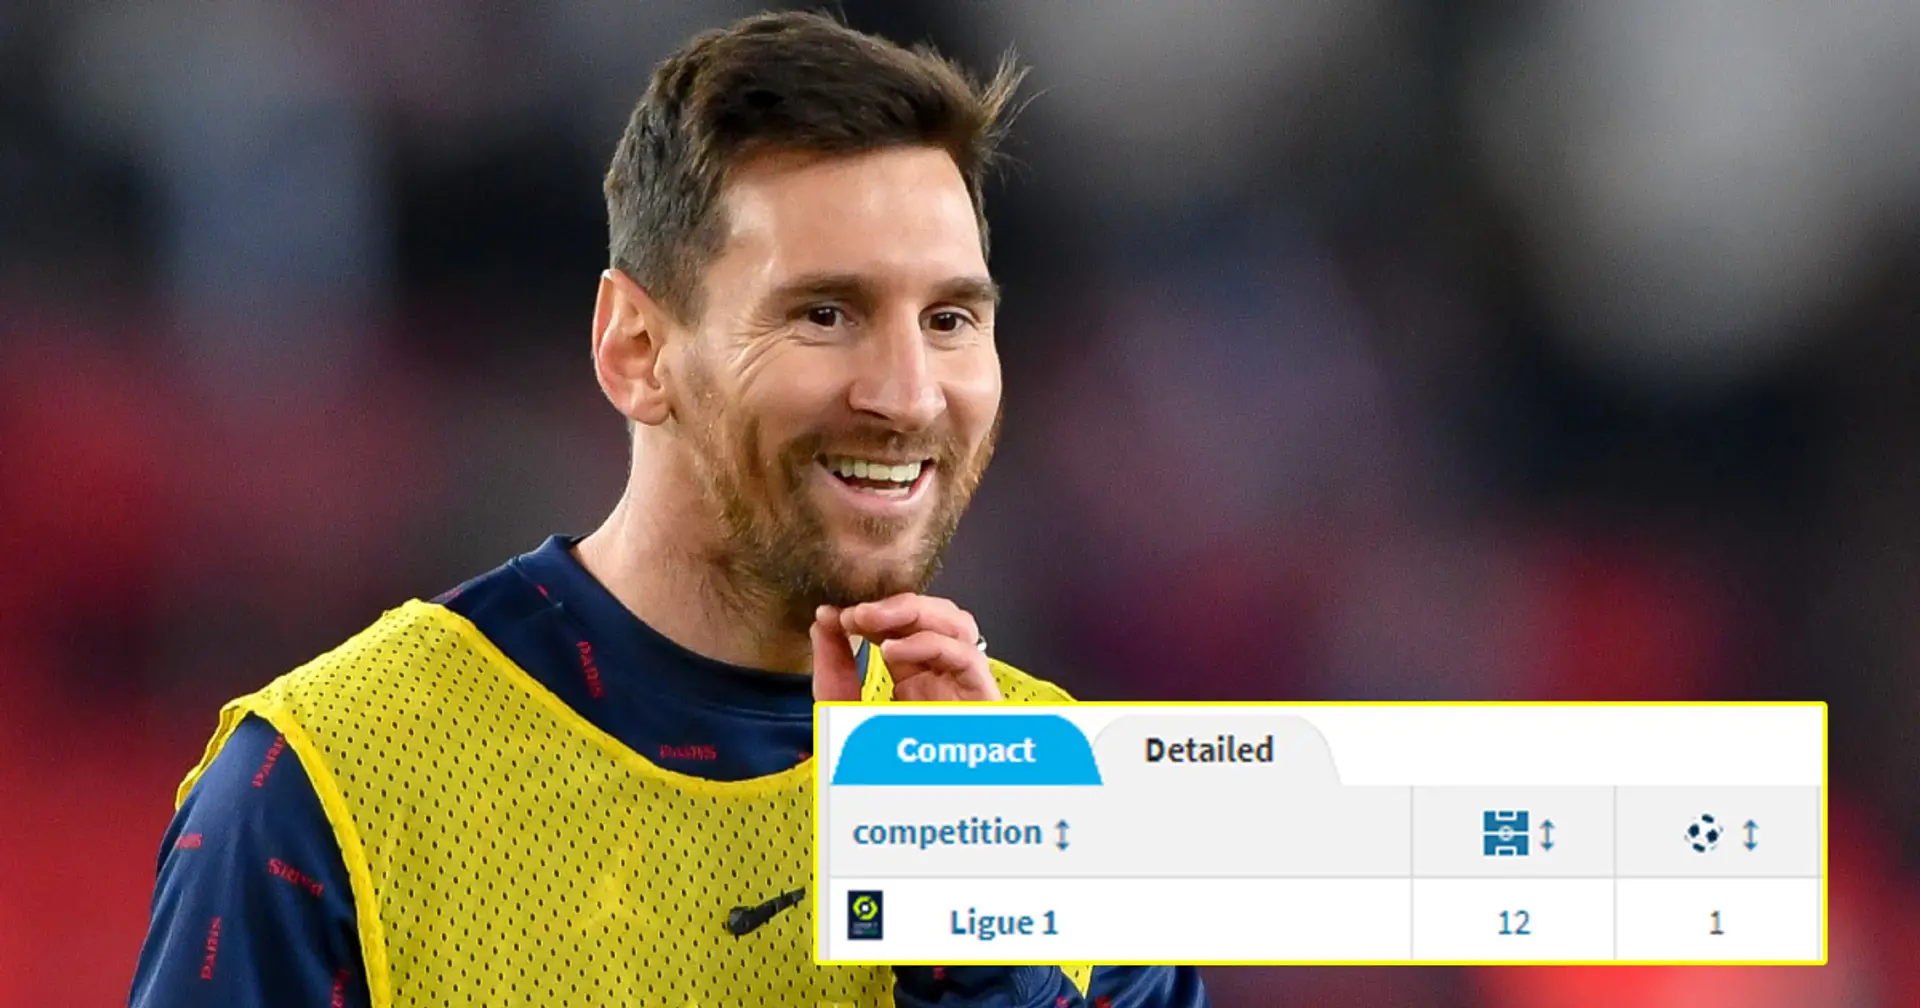 Another league game without a goal: catching up with Messi's stats